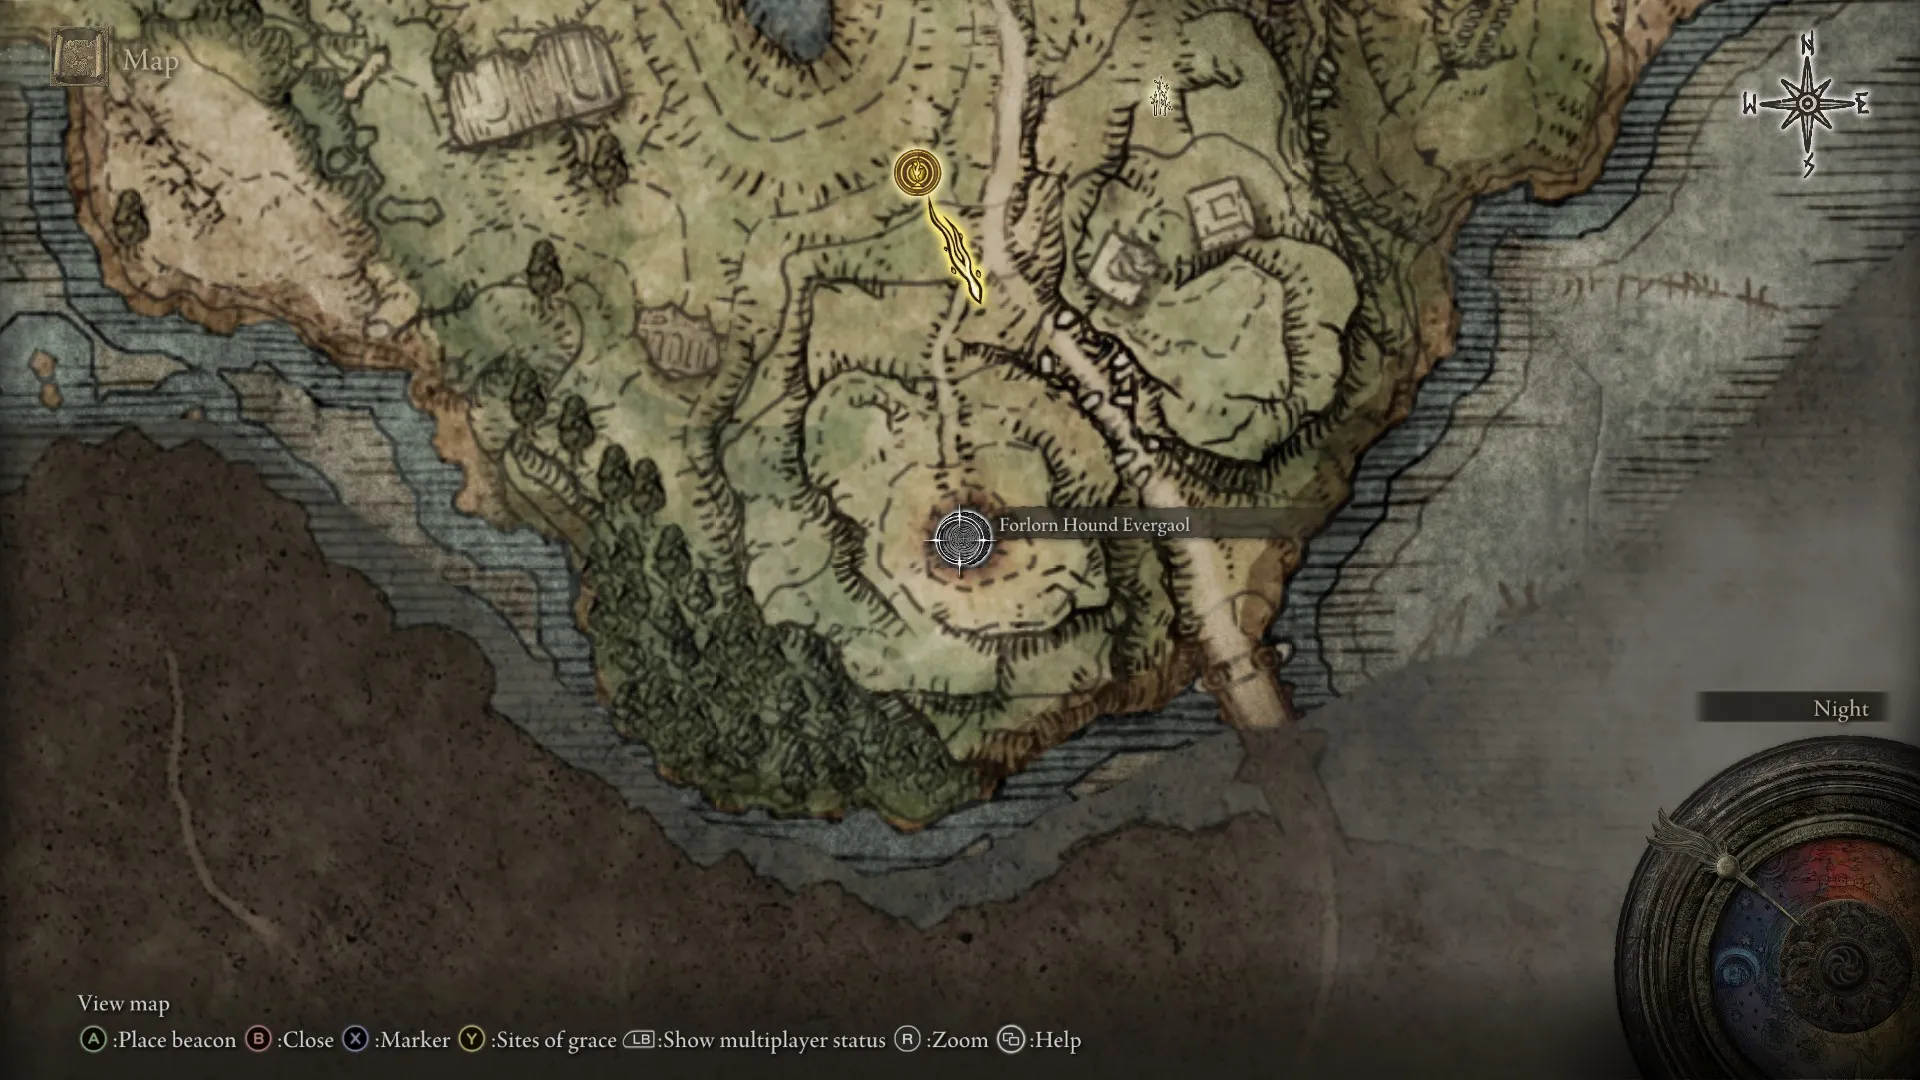 How to complete Blaidd's quest in Elden Ring - Polygon